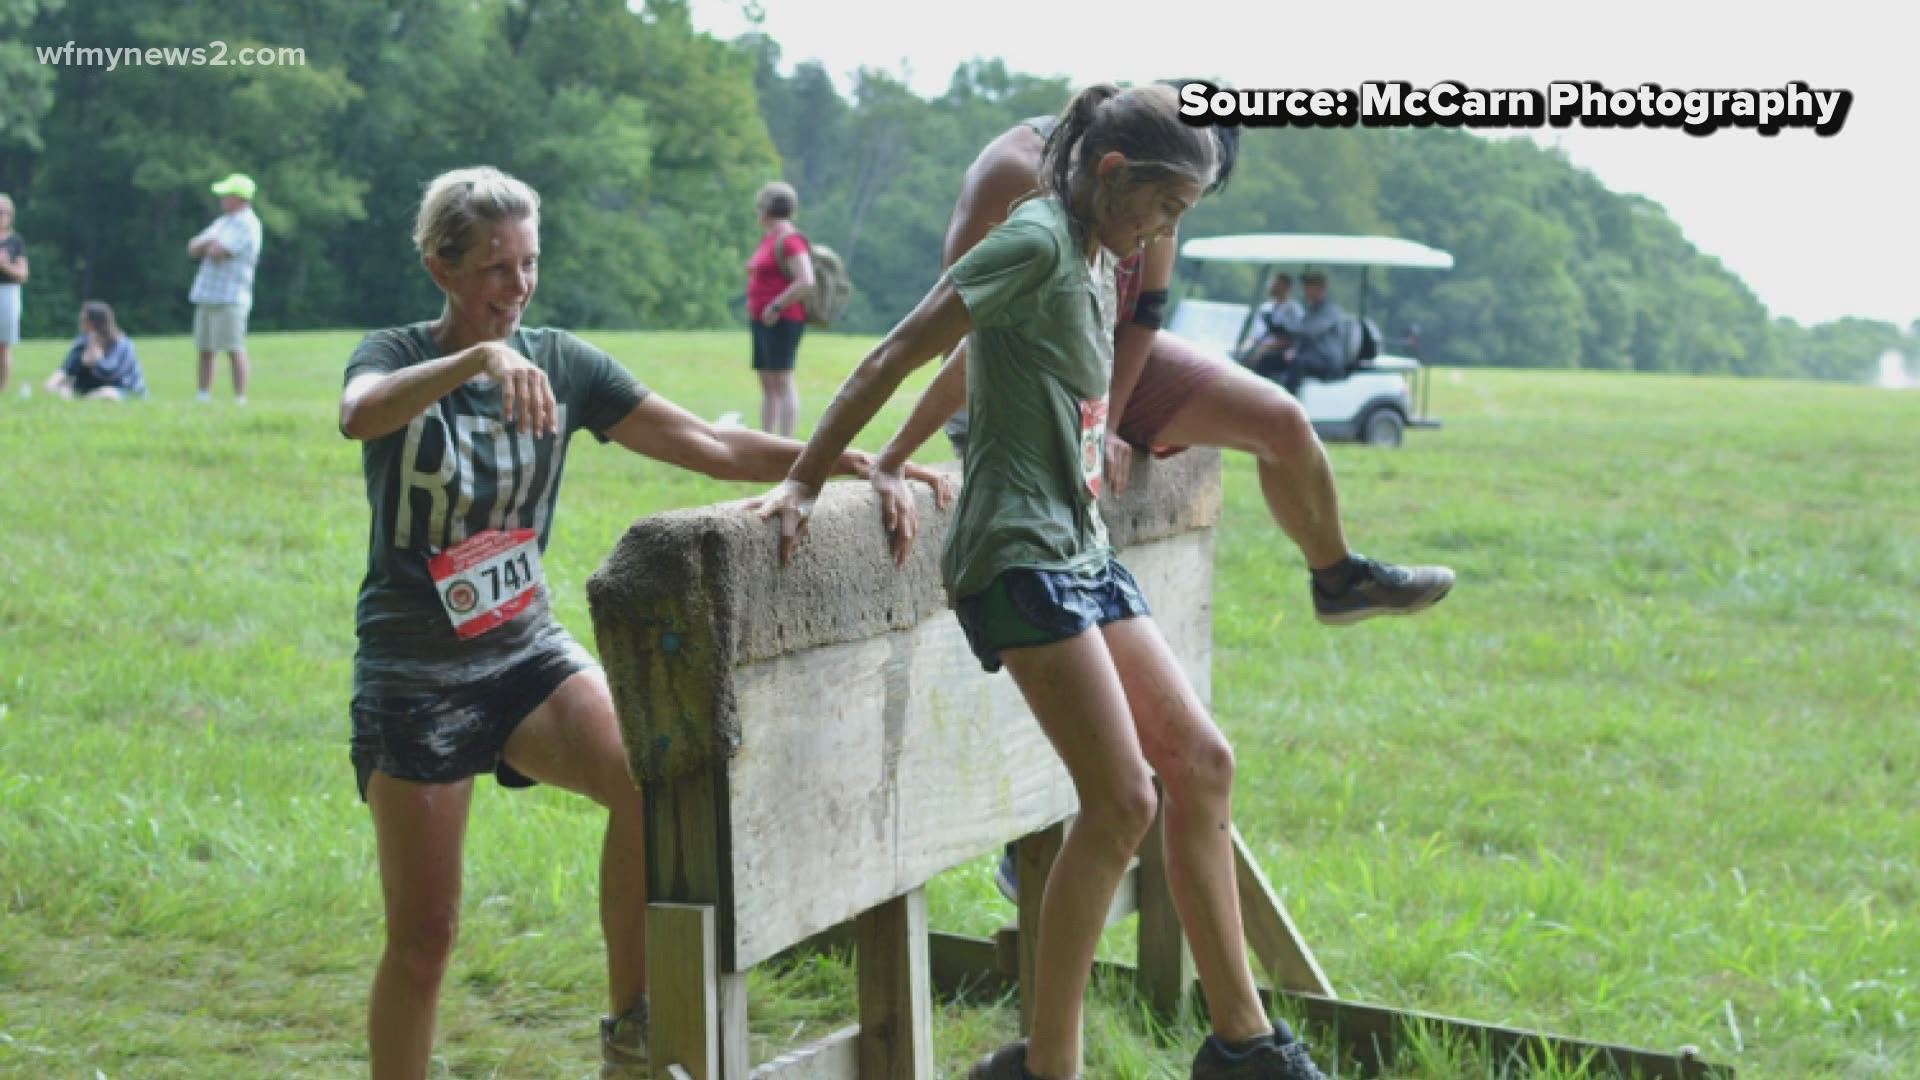 The Marine Corps League's Mud Run is approaching!